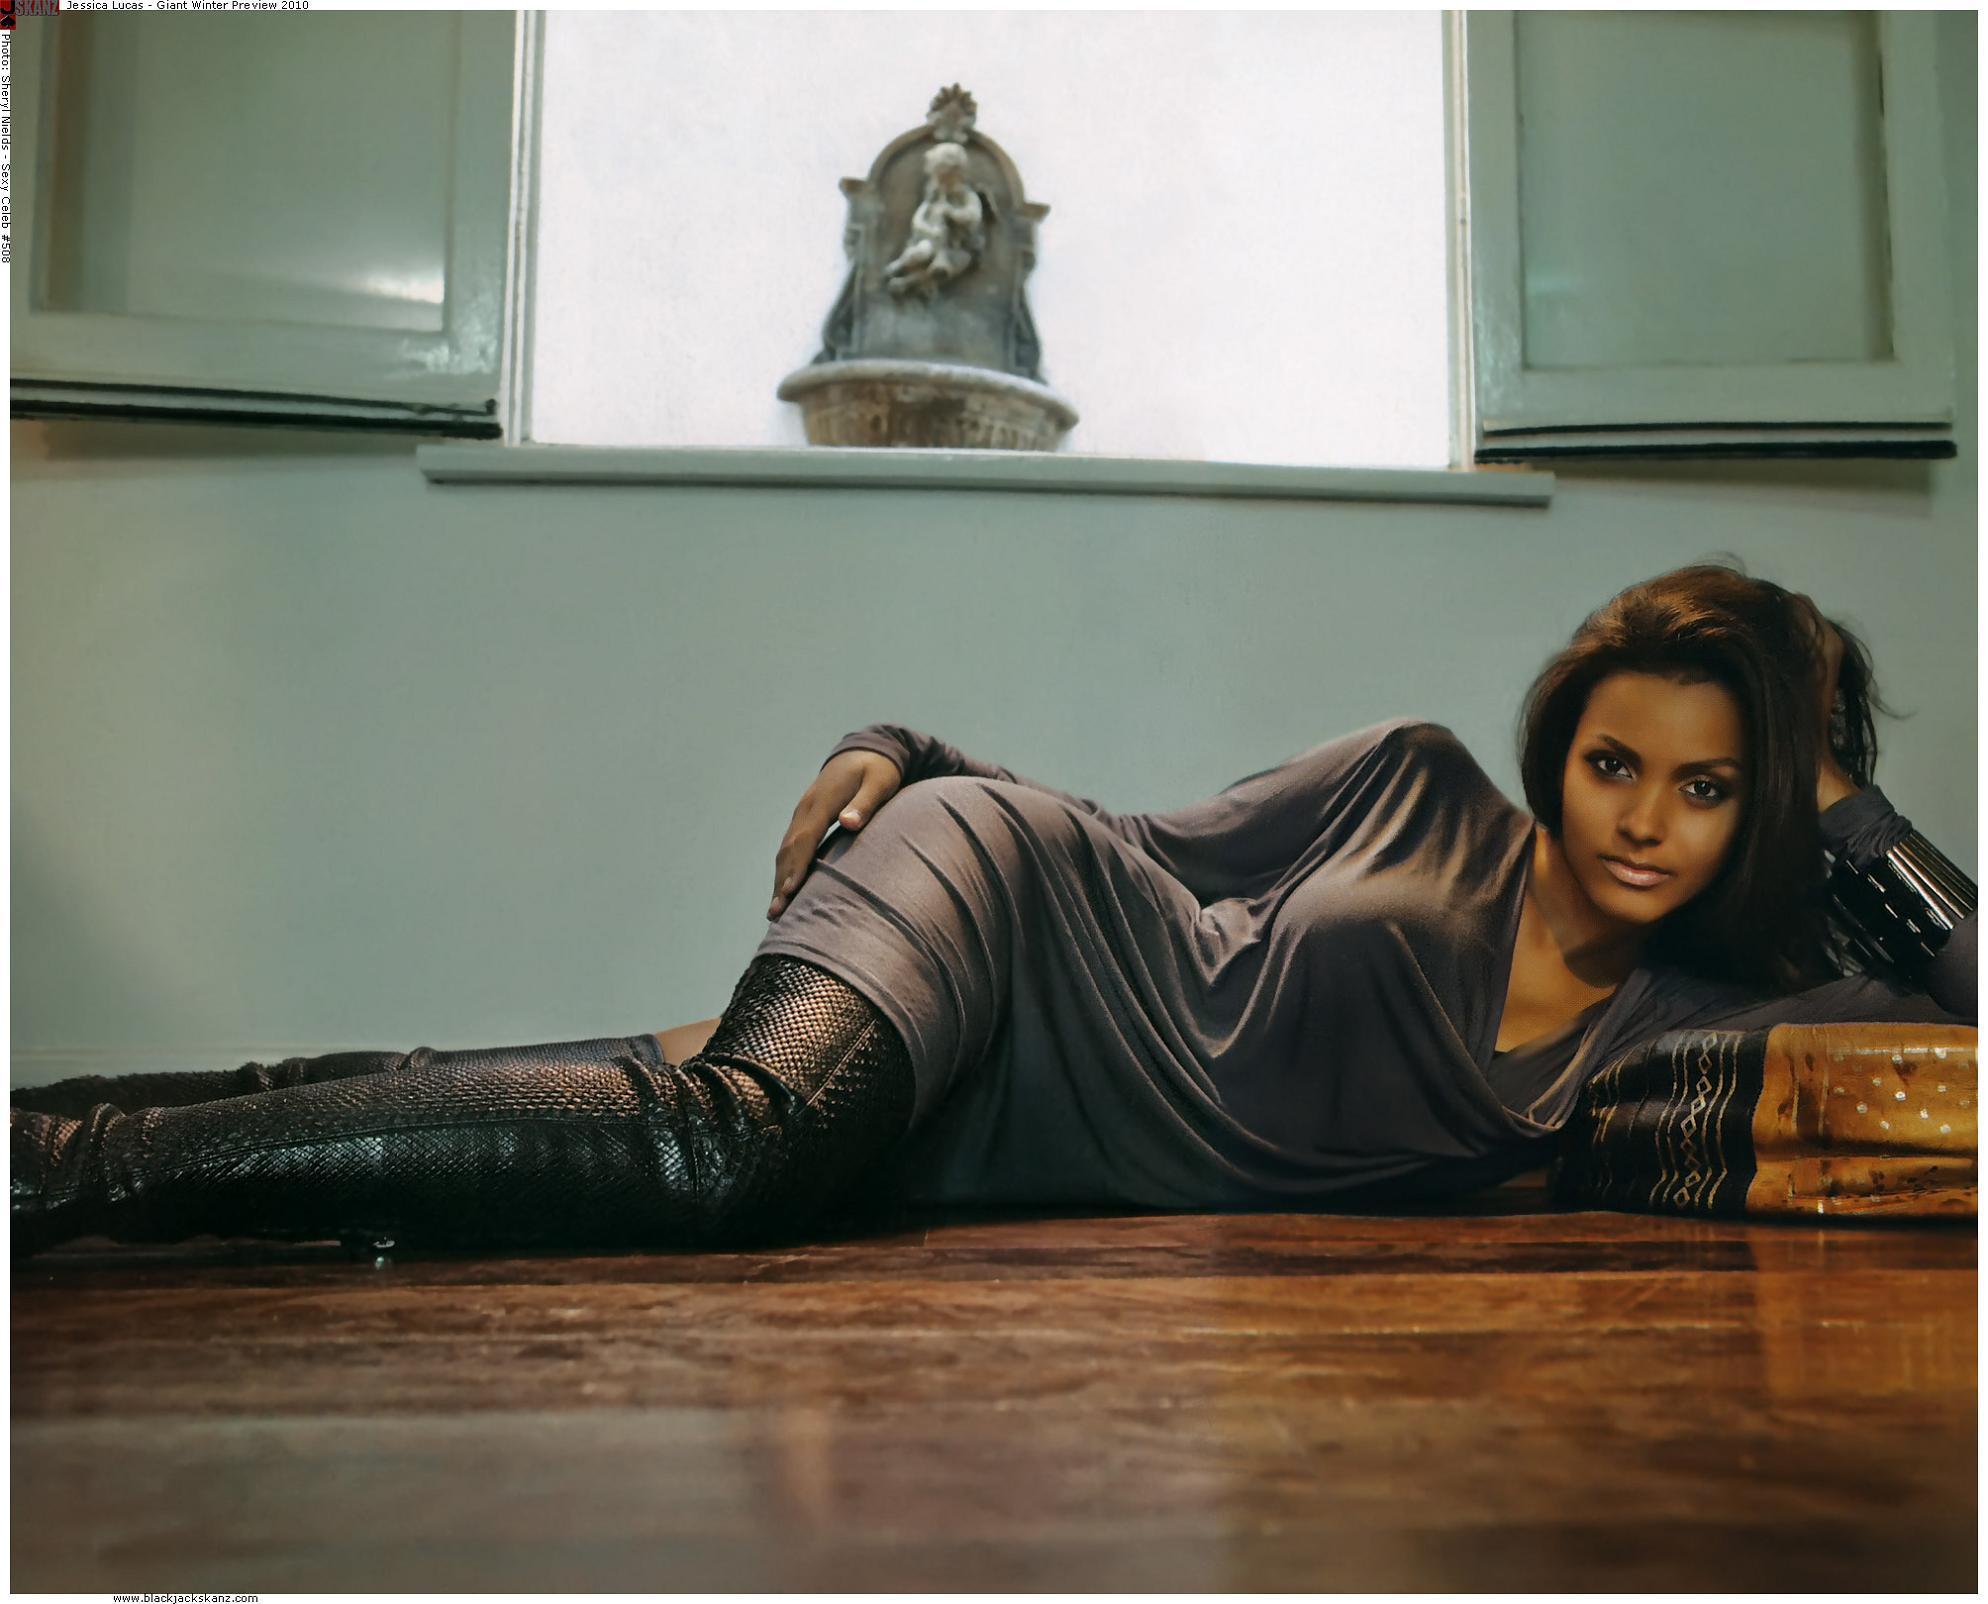 http://www.nubianplanet.com/beauty/jessica-lucas-is-one-hot-black-canadian-with-a-whip/